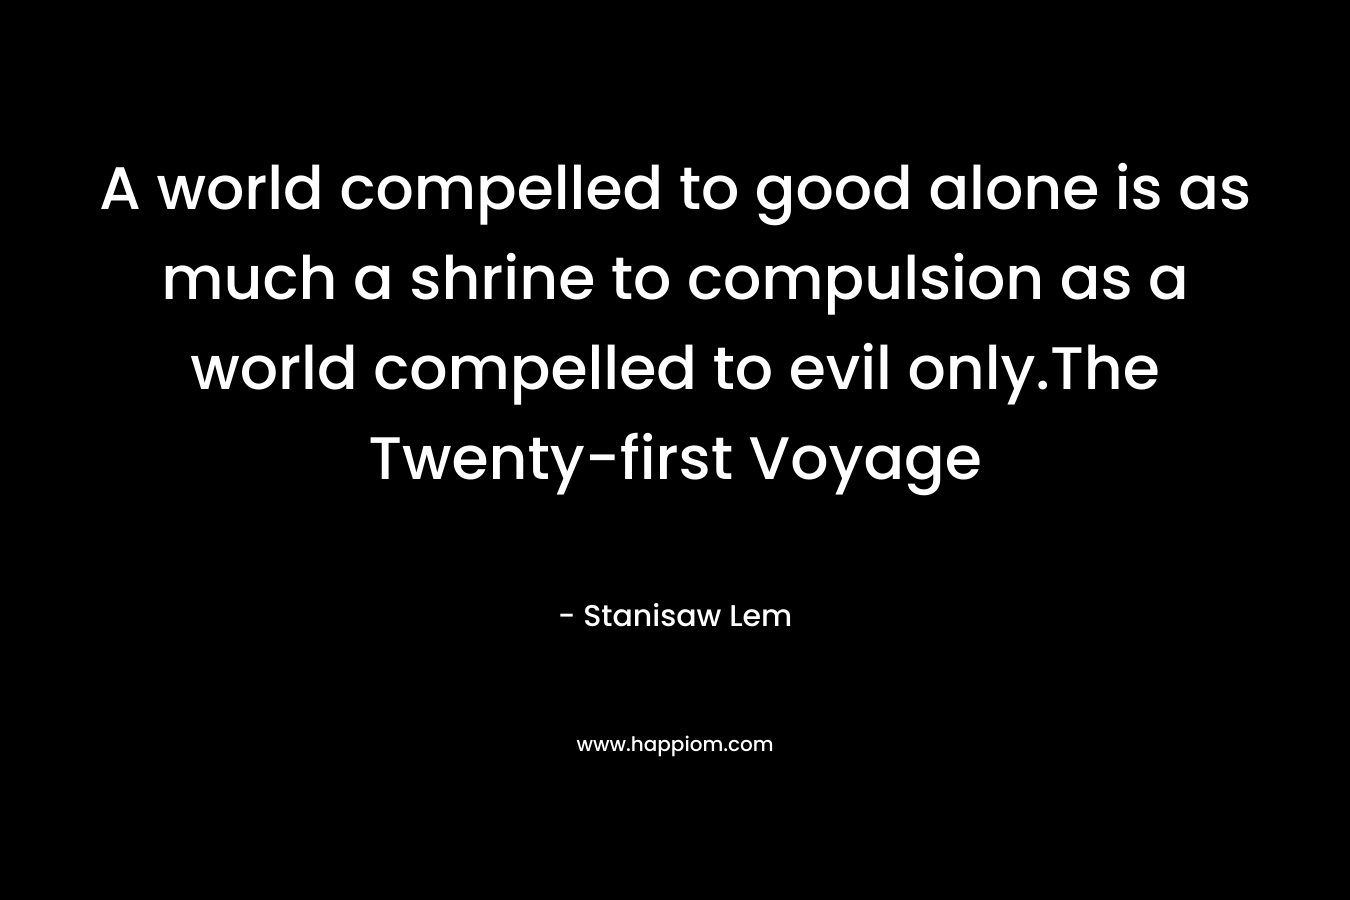 A world compelled to good alone is as much a shrine to compulsion as a world compelled to evil only.The Twenty-first Voyage